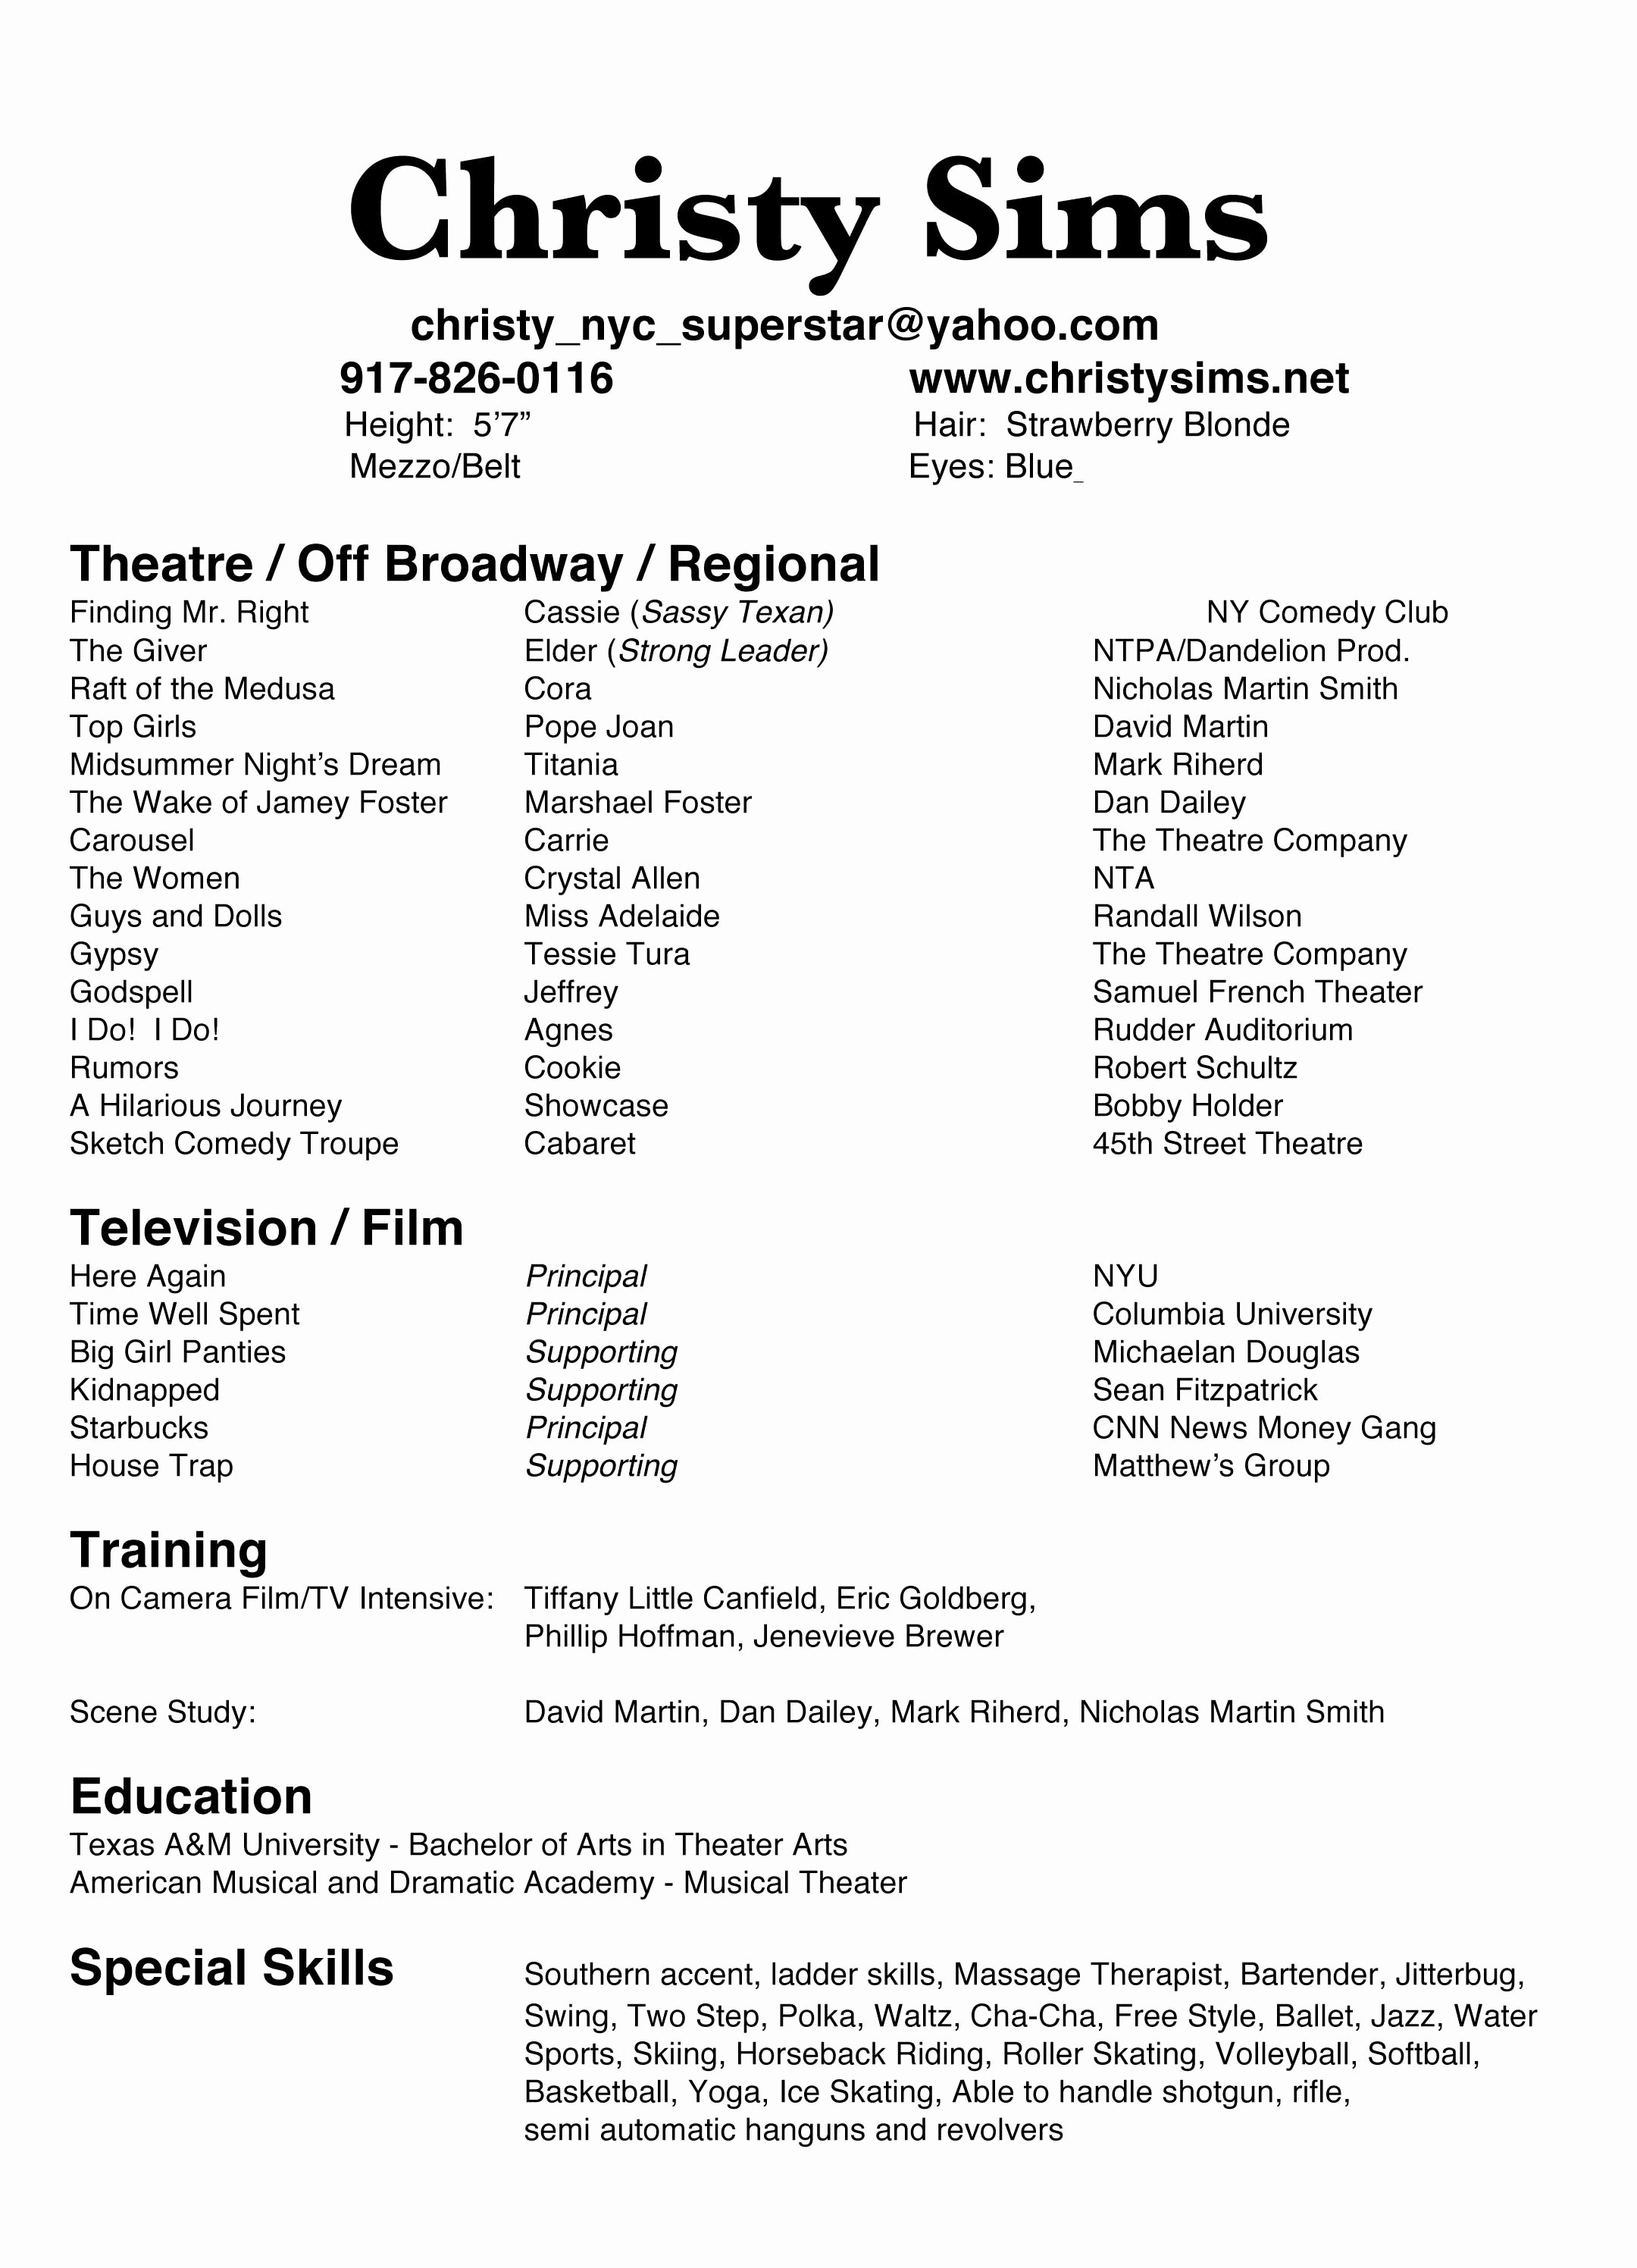 Technical theatre Resumes Technical theatre Resume the